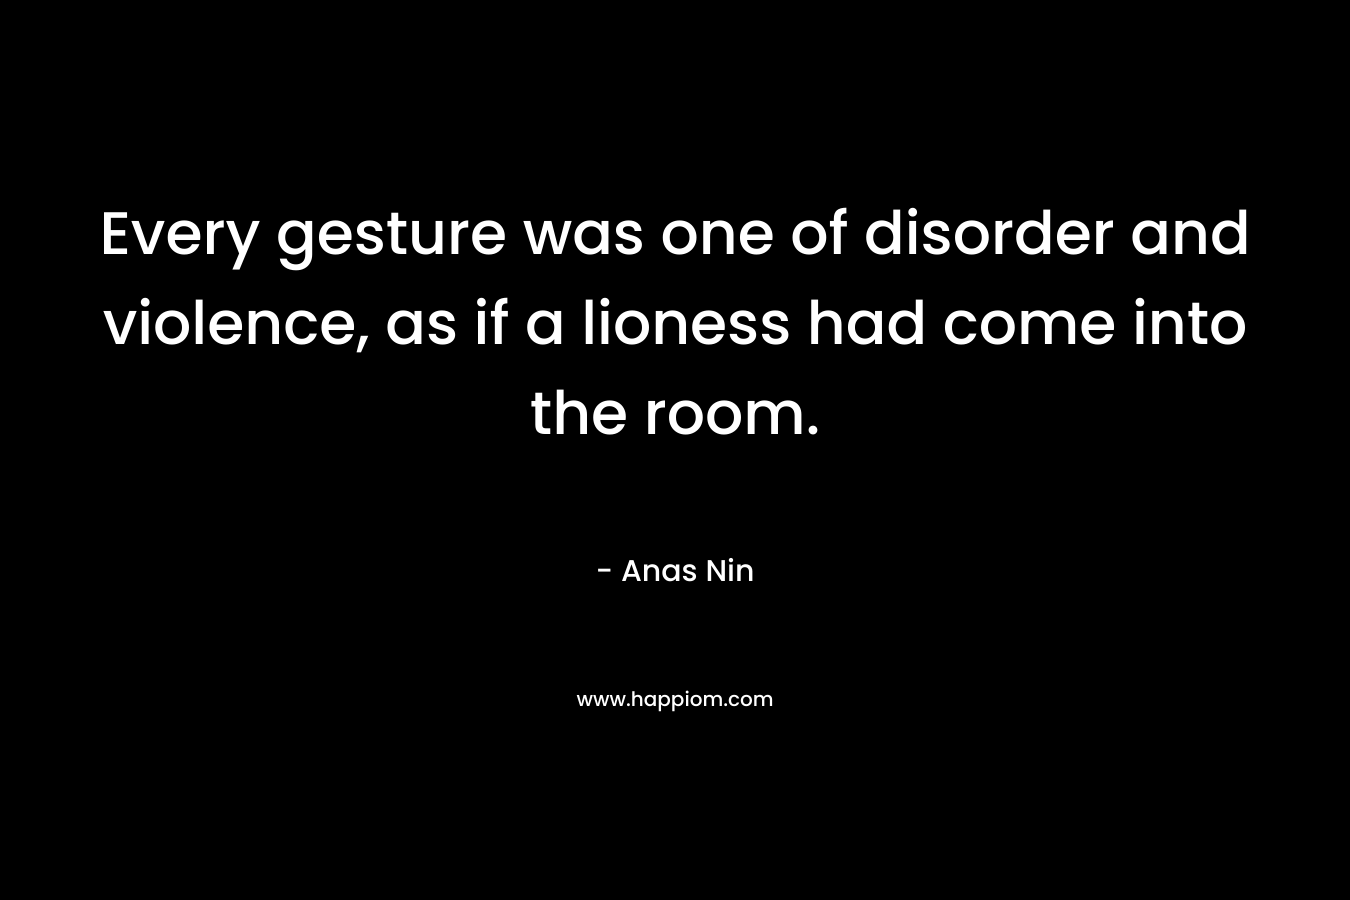 Every gesture was one of disorder and violence, as if a lioness had come into the room. – Anas Nin